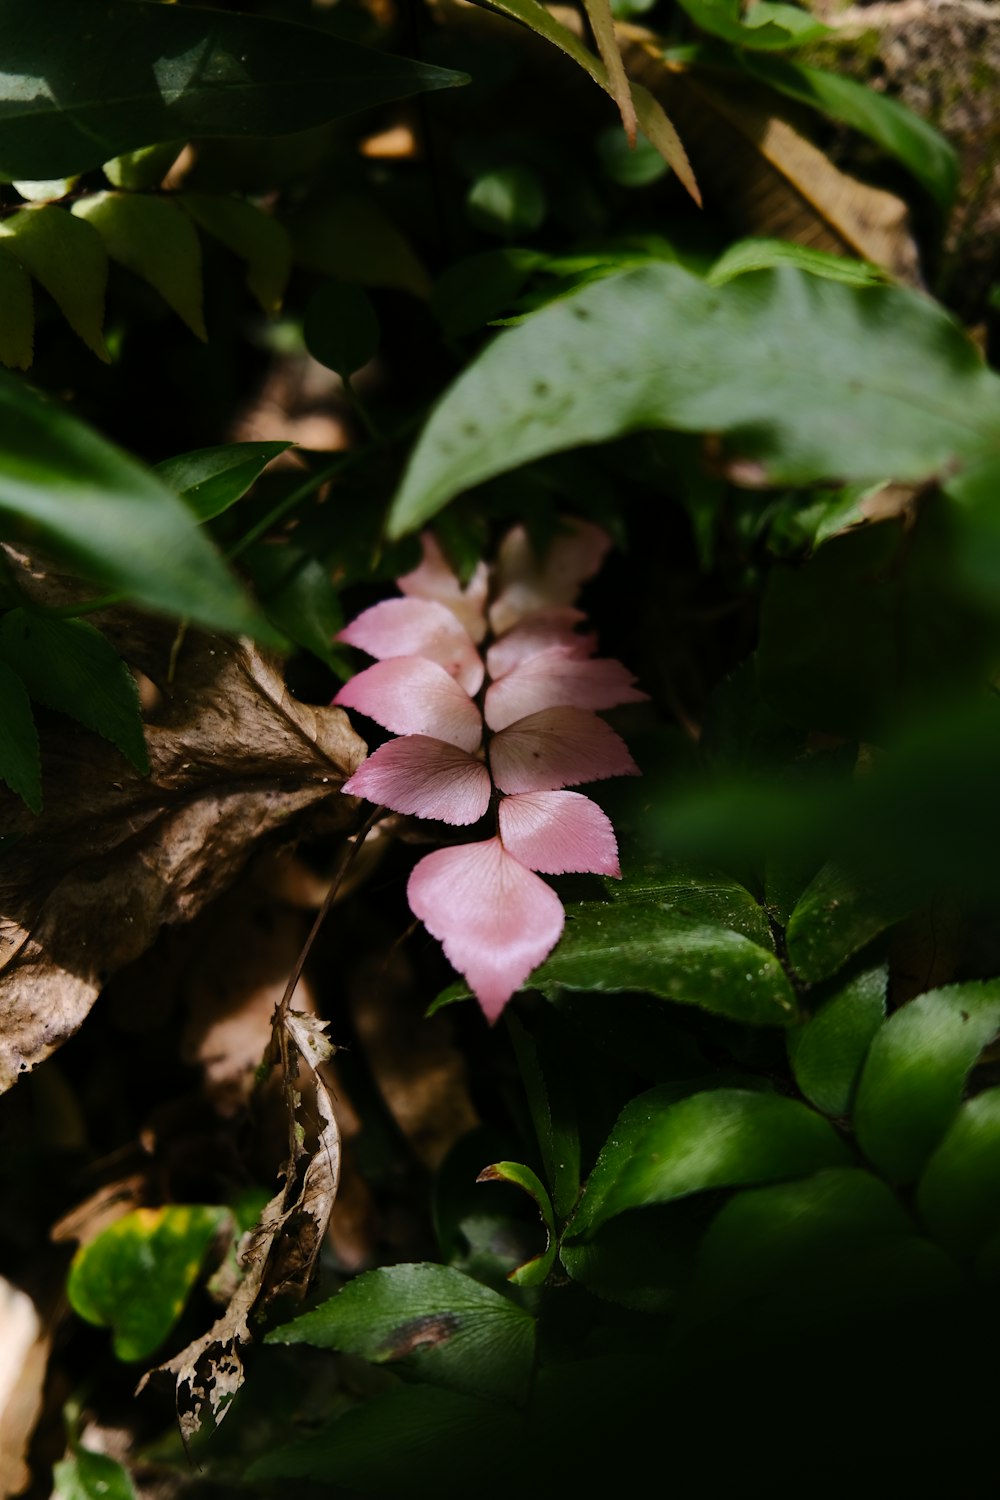 a small pink flower surrounded by green leaves